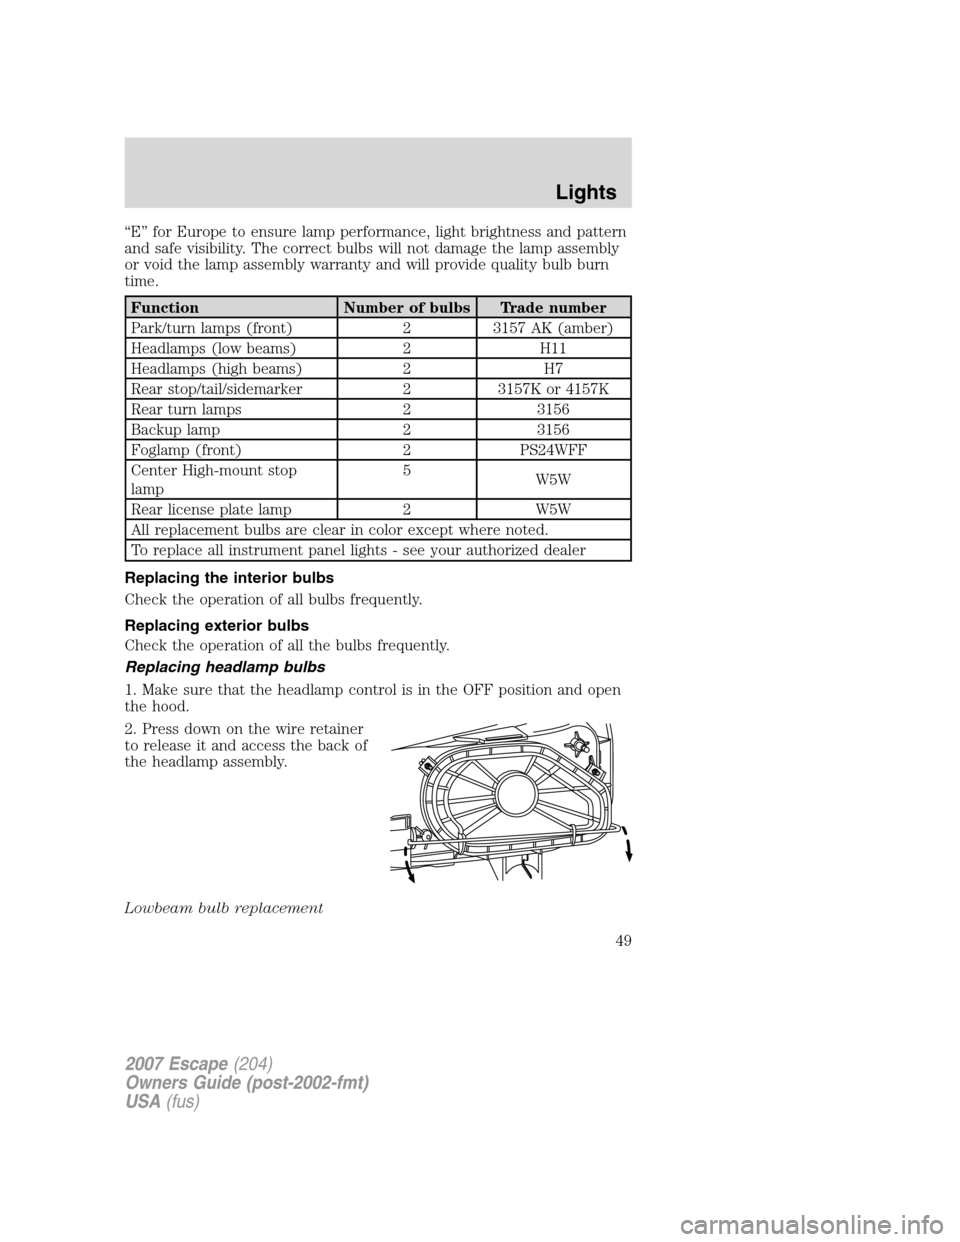 FORD ESCAPE 2007 2.G Owners Manual “E” for Europe to ensure lamp performance, light brightness and pattern
and safe visibility. The correct bulbs will not damage the lamp assembly
or void the lamp assembly warranty and will provide